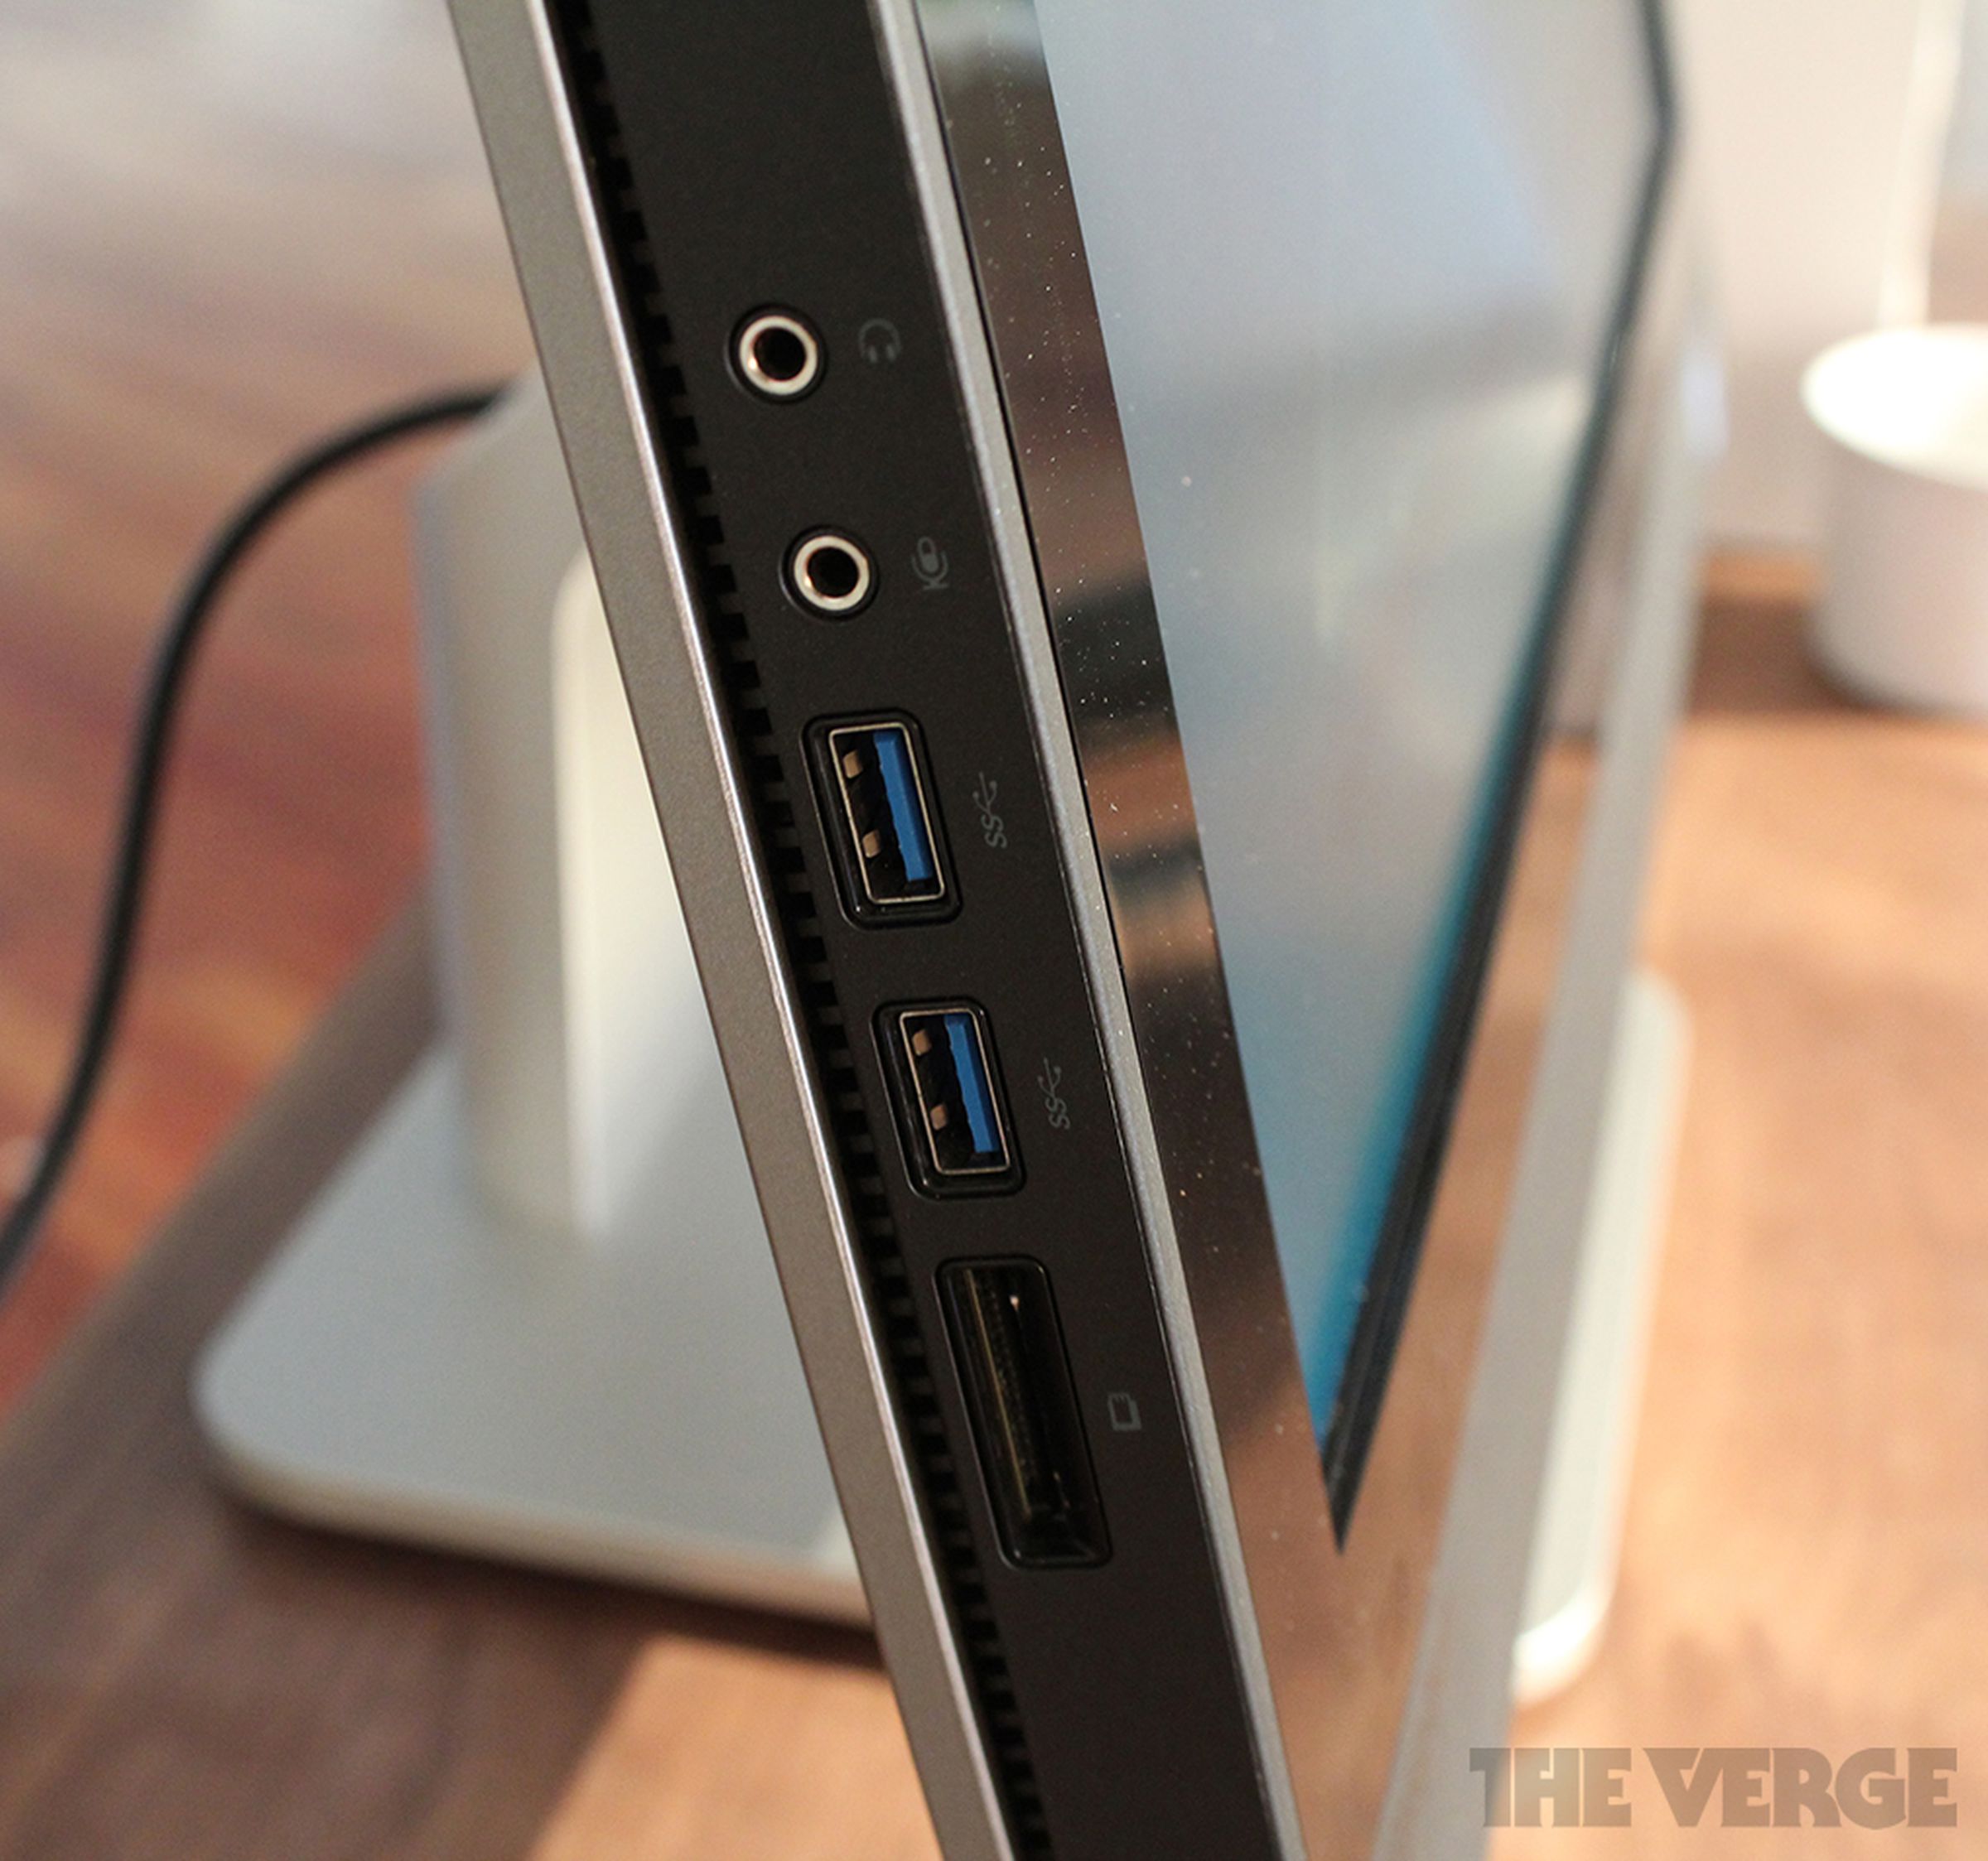 Dell Inspiron One all-in-one hands-on photos